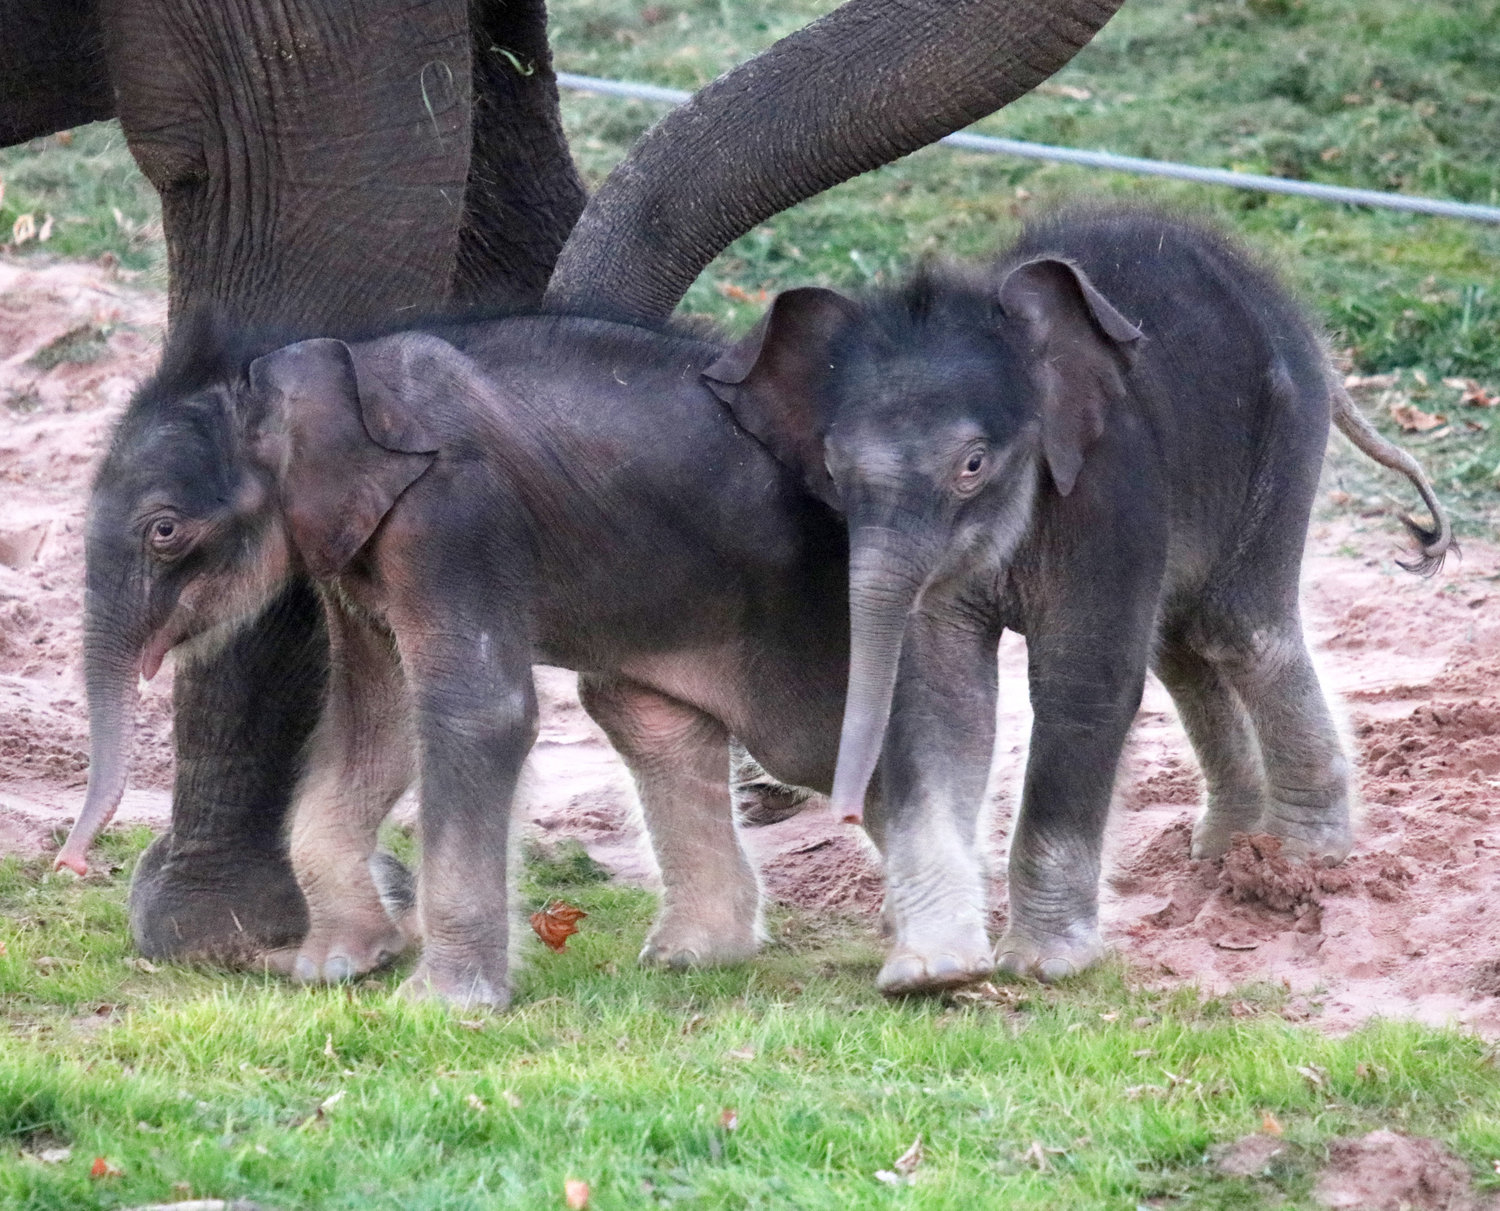 Male Asian elephant twins were born at the Rosamond Gifford Zoo on October 24, 2022. Their birth marked a historic occasion as elephant twins reportedly comprise less than 1% of elephant births worldwide.